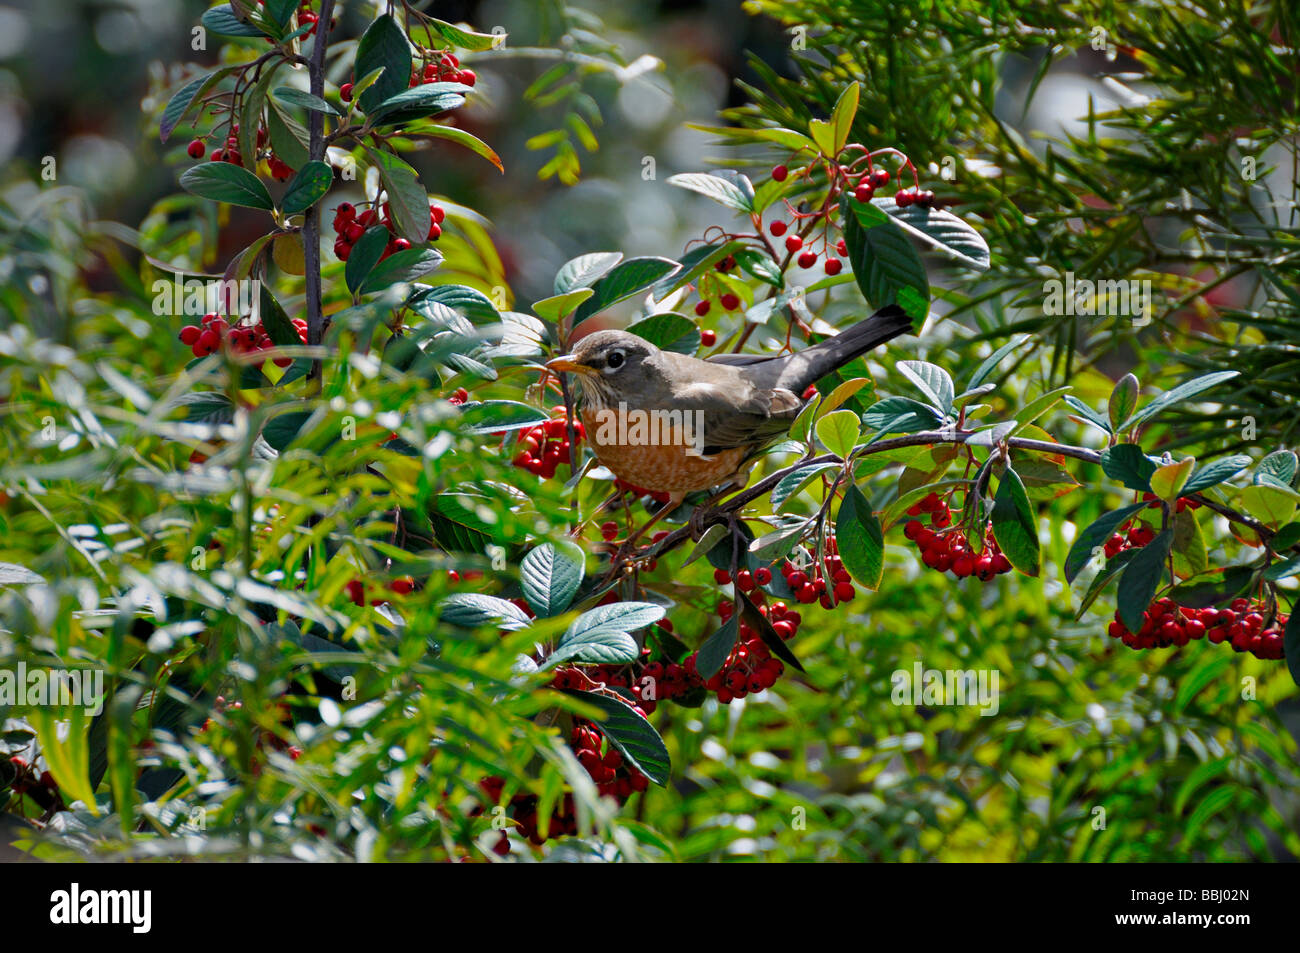 An American Robin bird (Turdus migratorius) perched on a the branch of a cotoneaster tree among red berries. Stock Photo